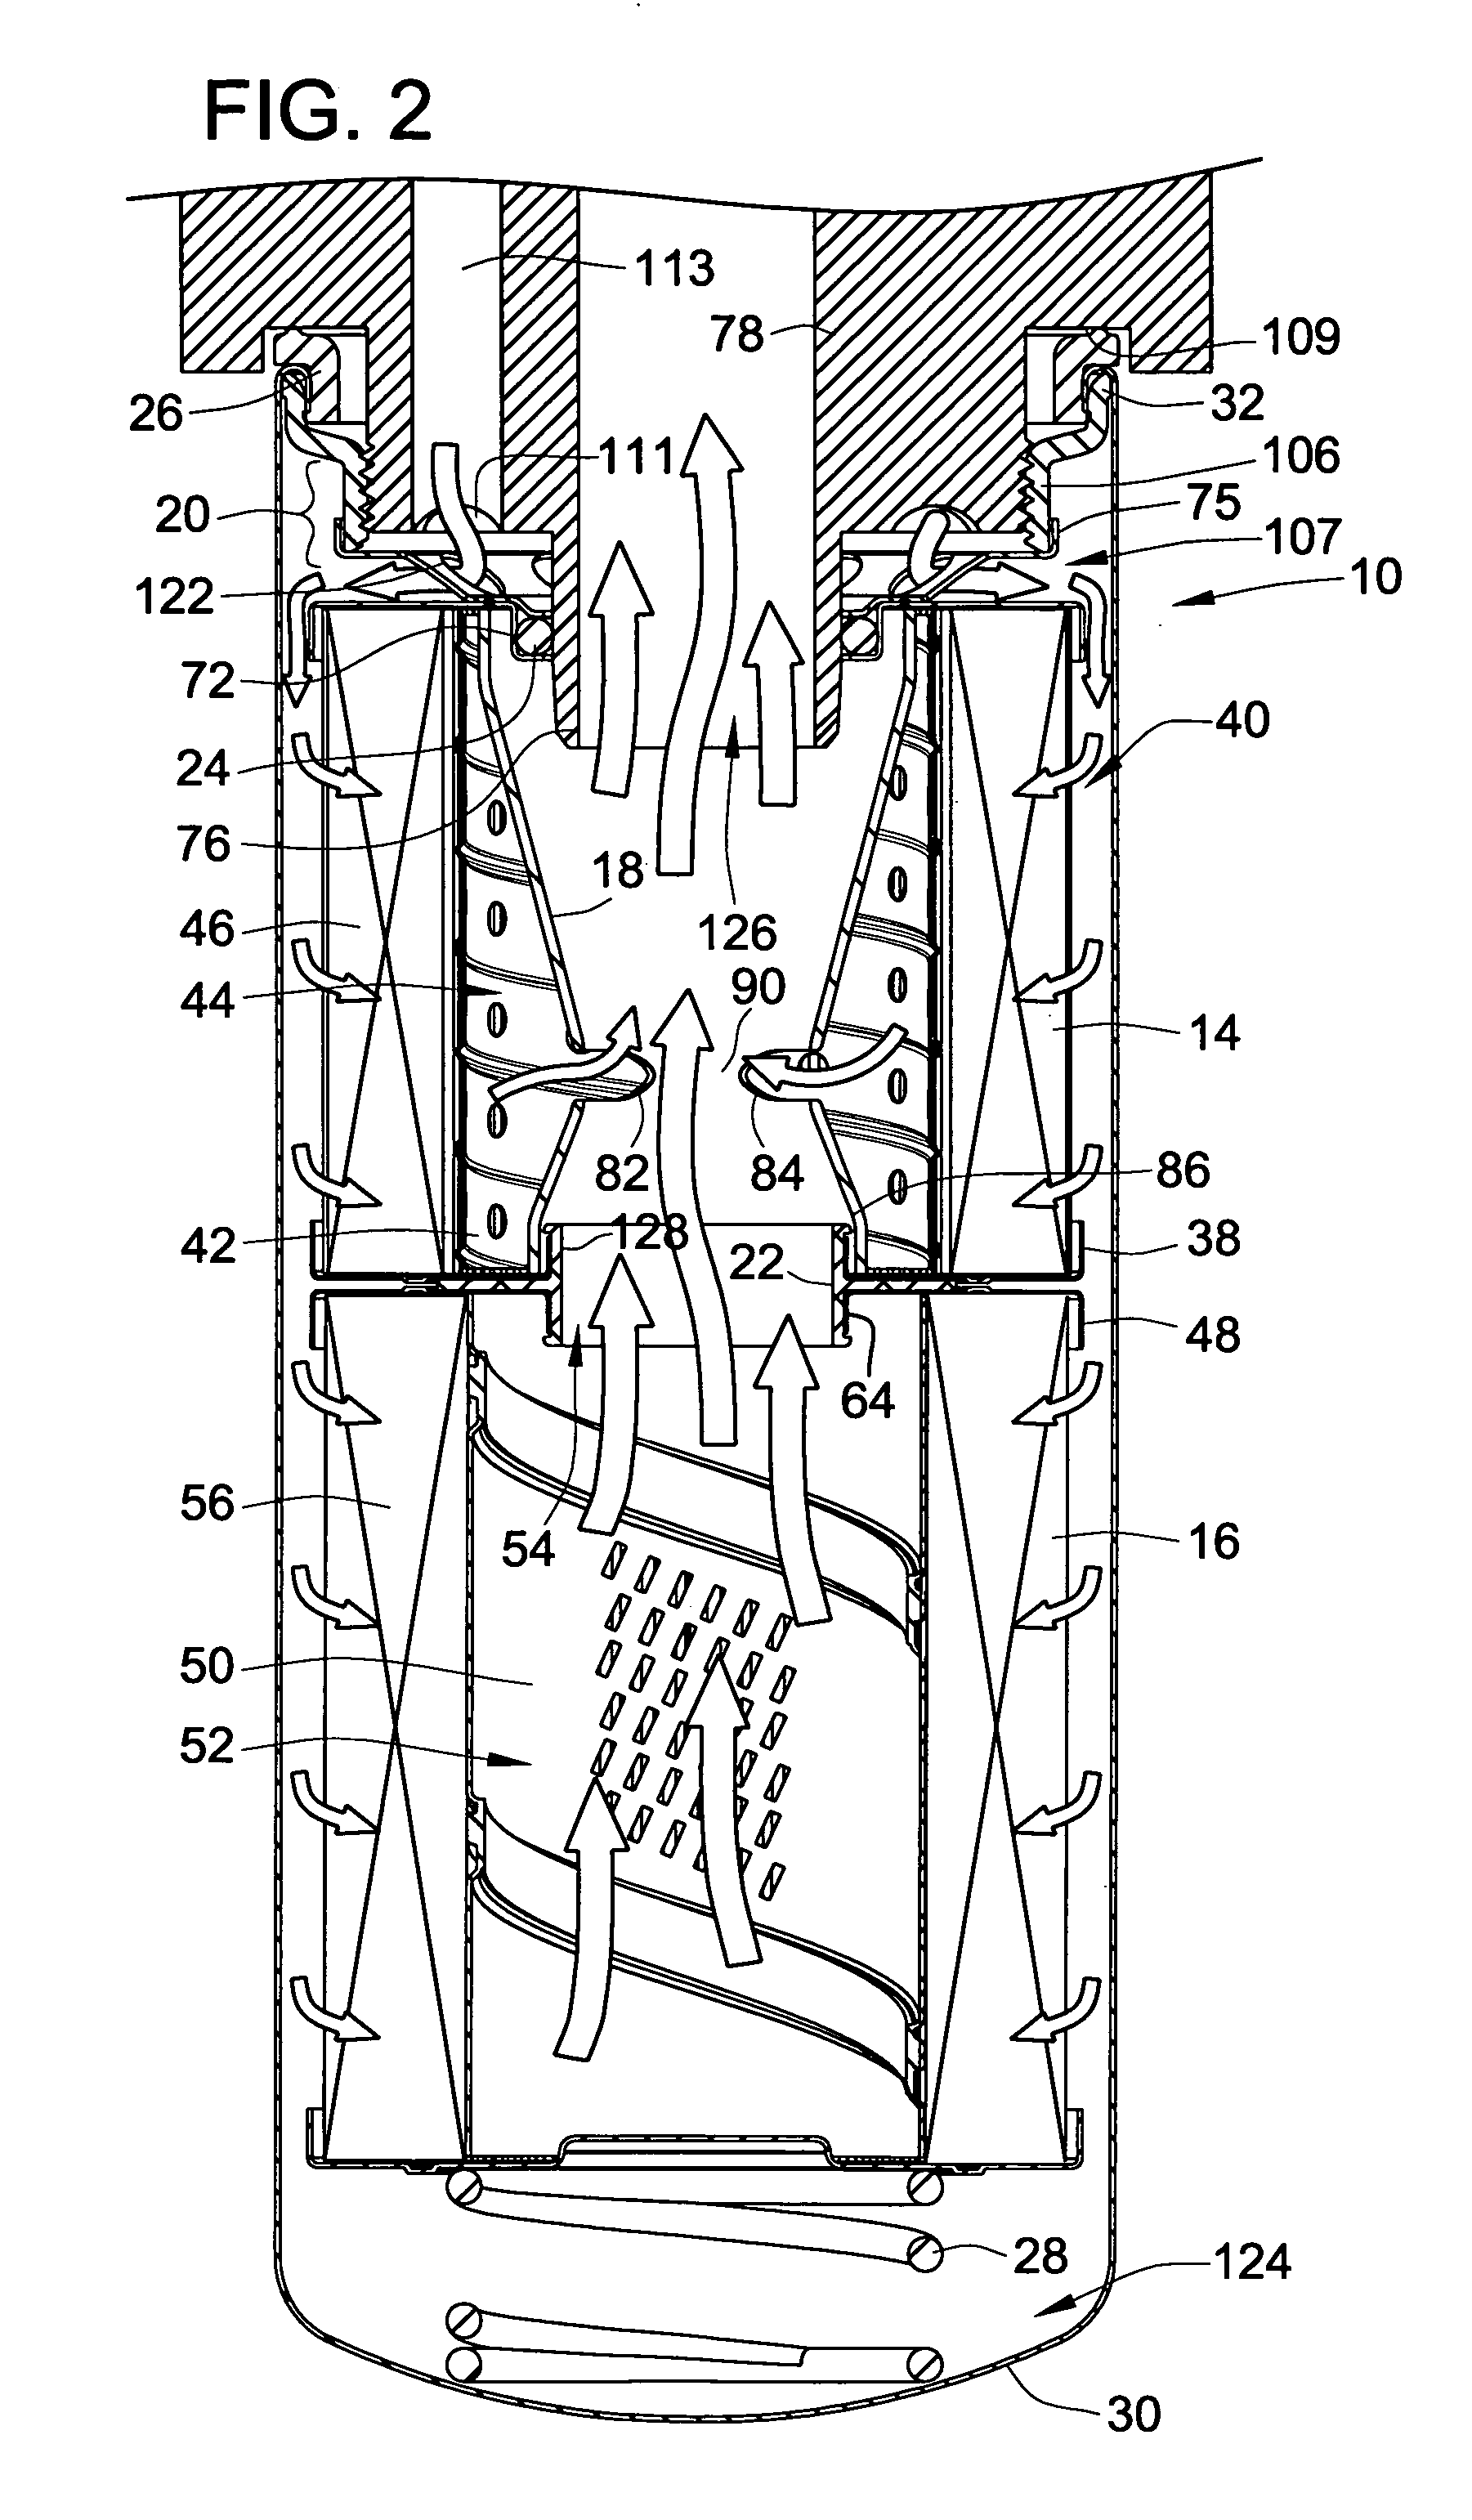 Fluid filtration apparatus and method